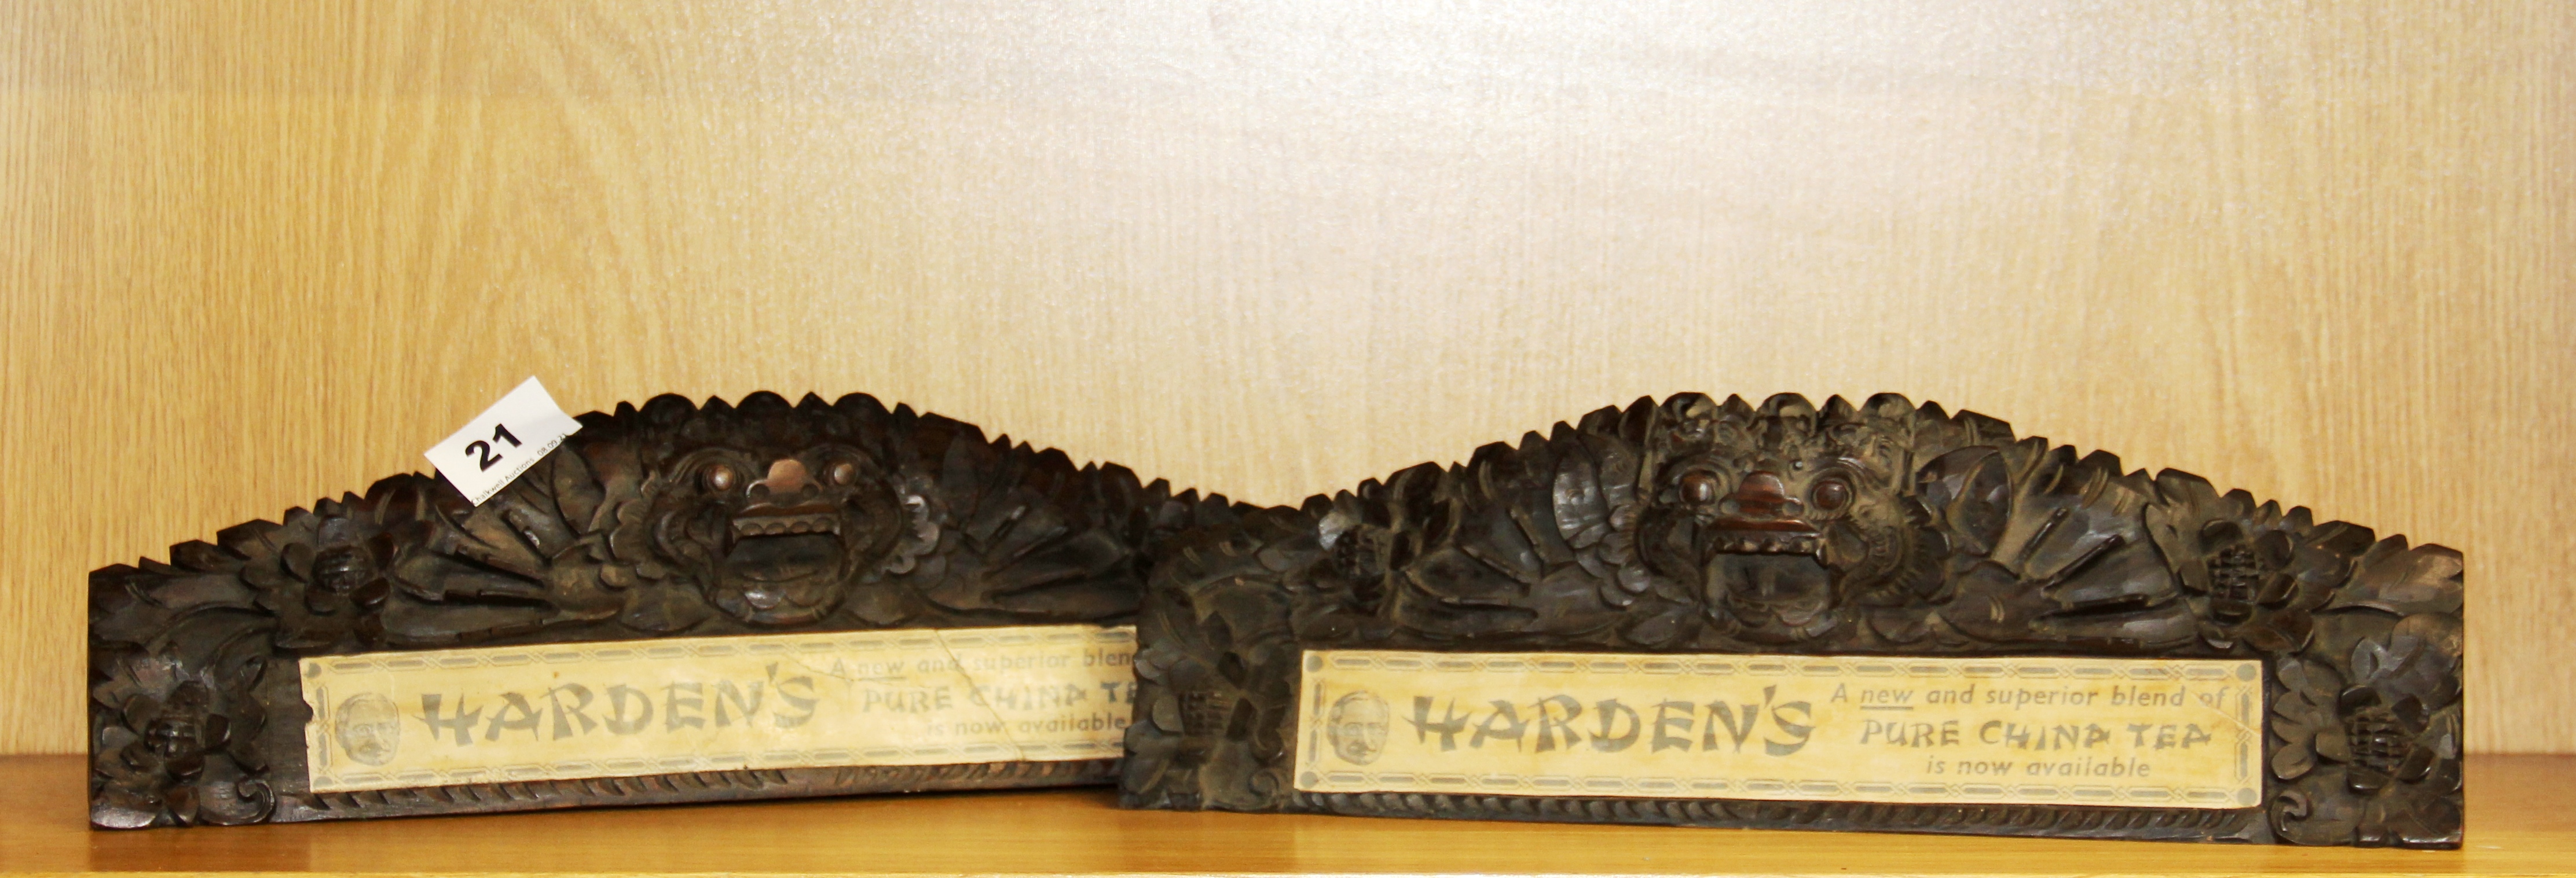 A pair of antique Oriental carved hardwood shop advertising signs for Harding's pure China tea, W.